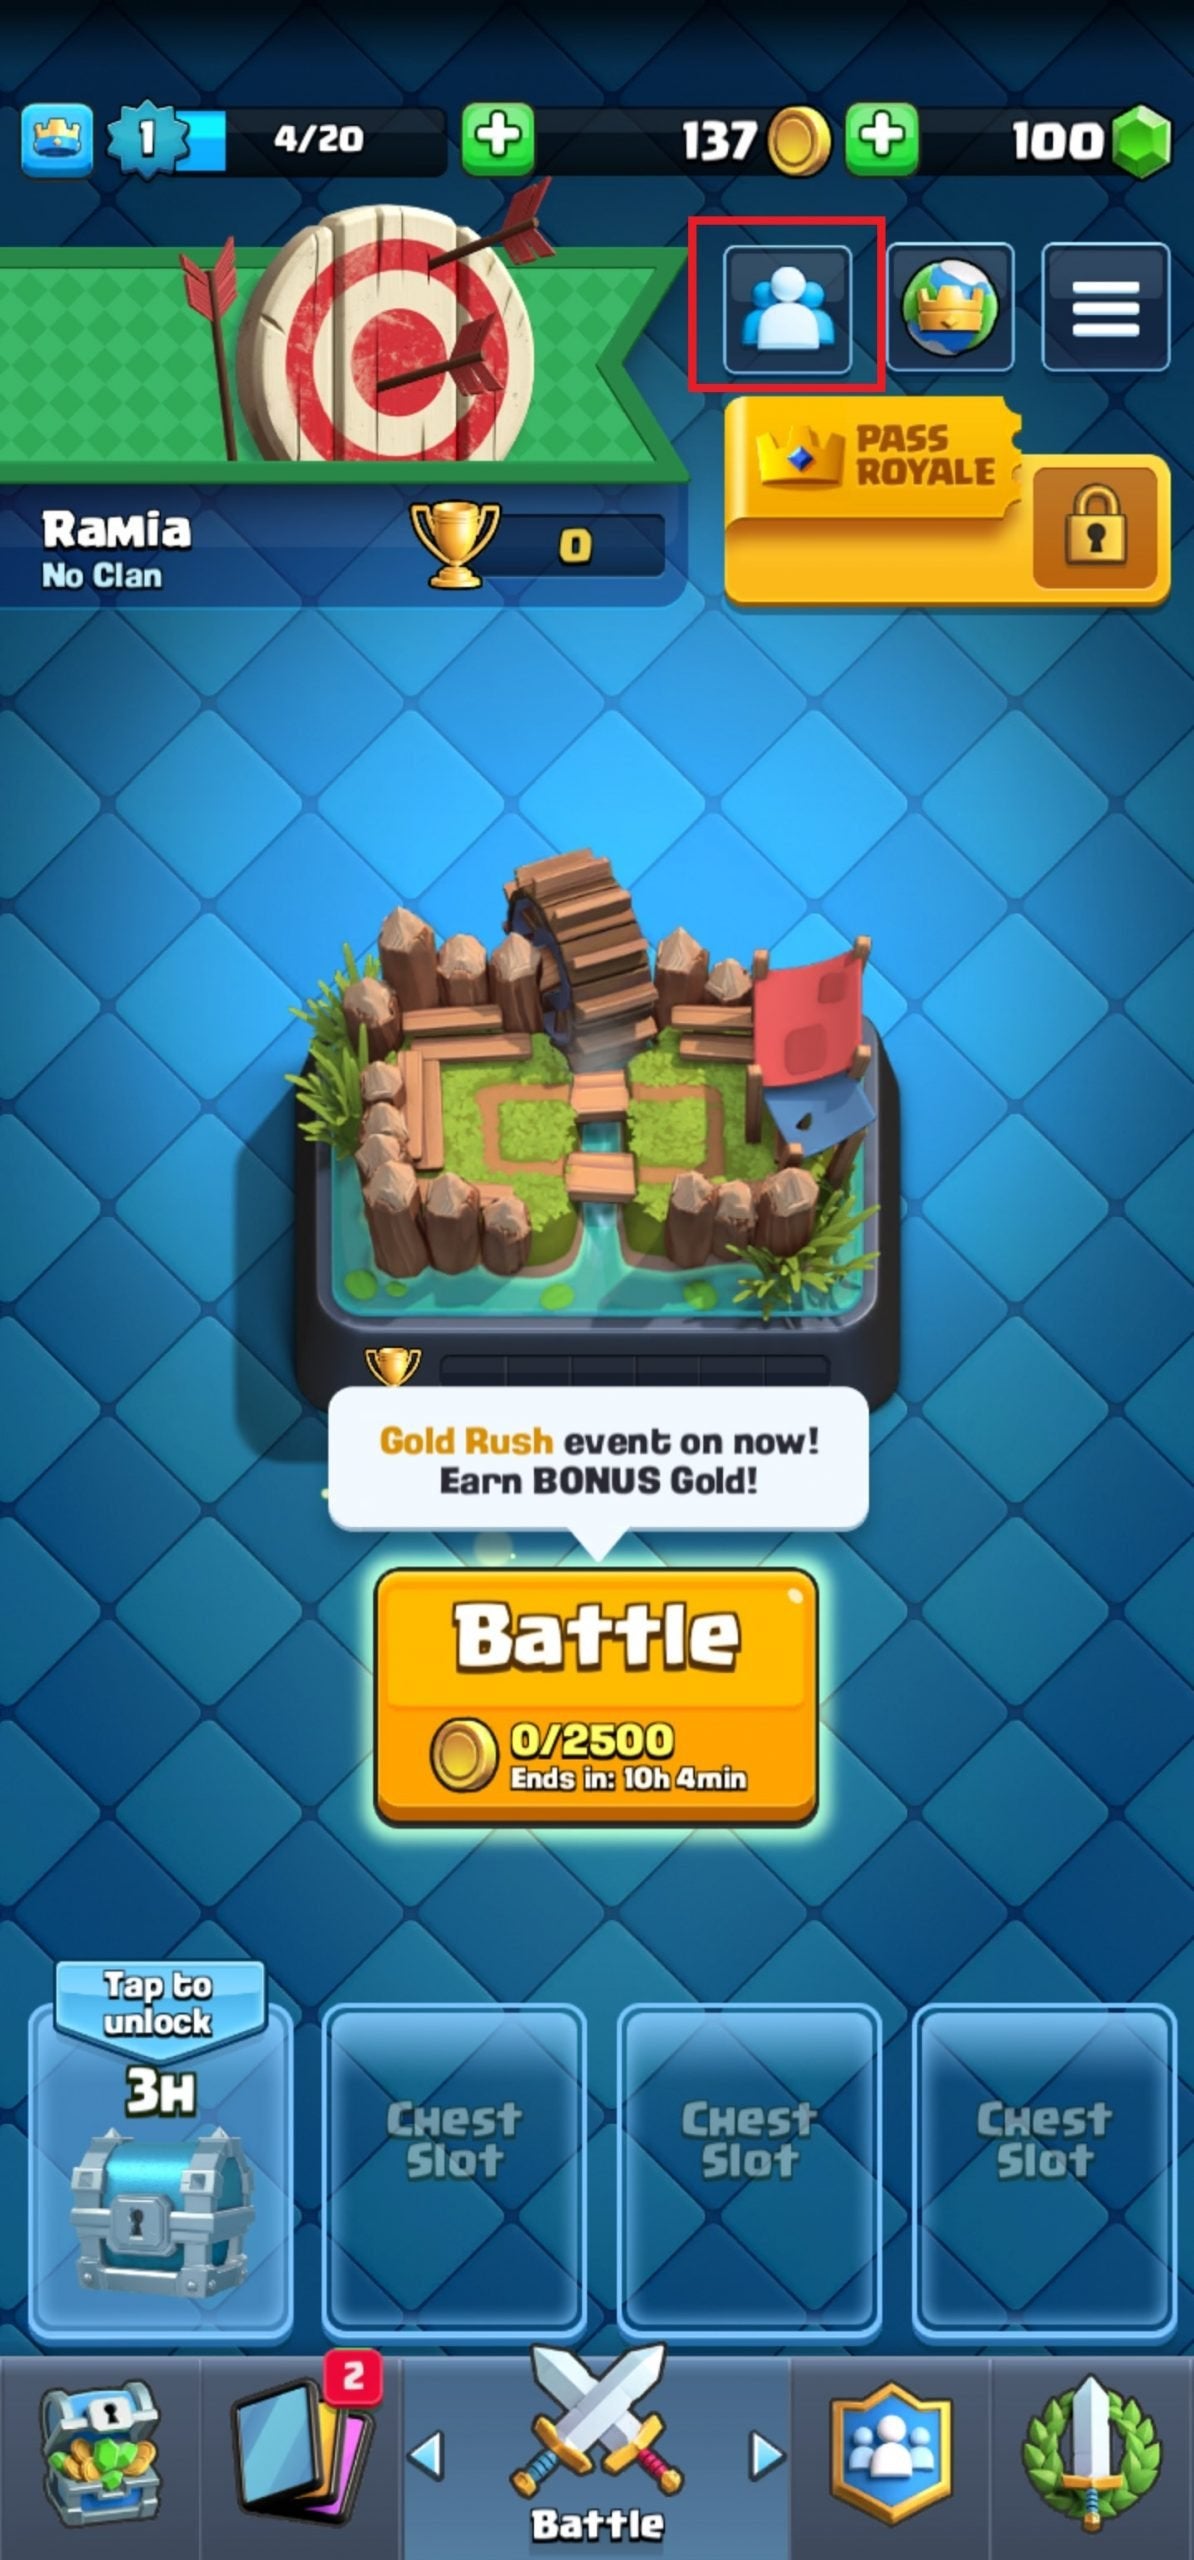 The button to click to add friends in the Clash Royale mobile game.